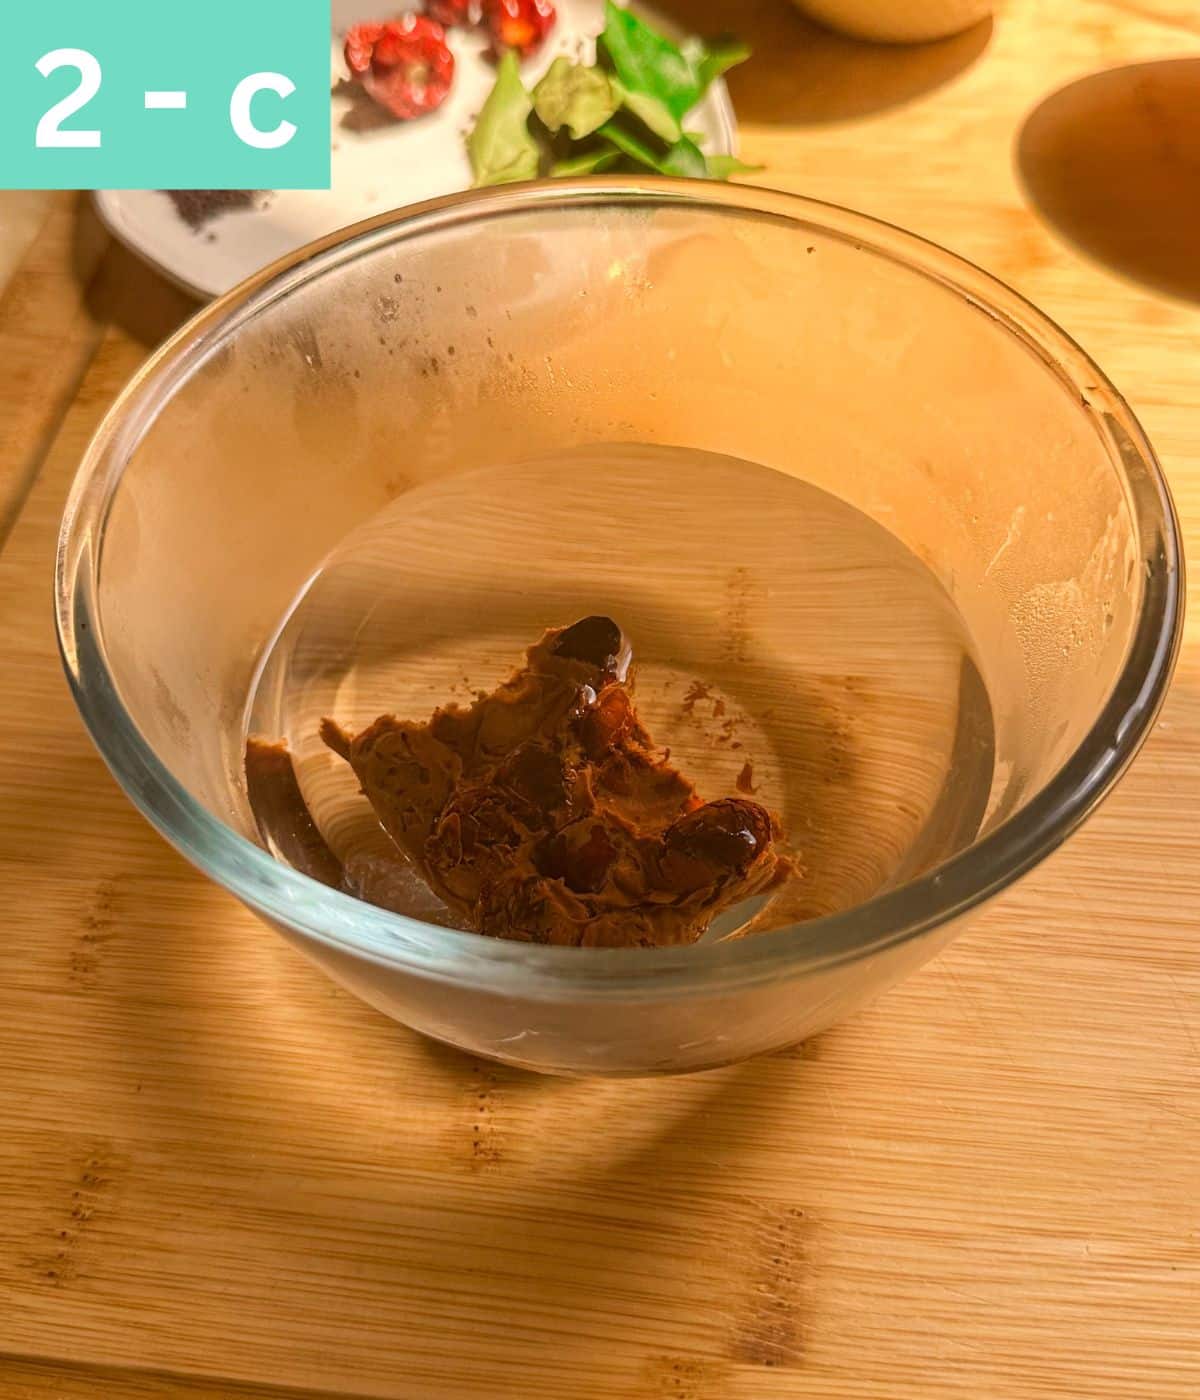 a small block of tamarind soaked in water in a bowl.